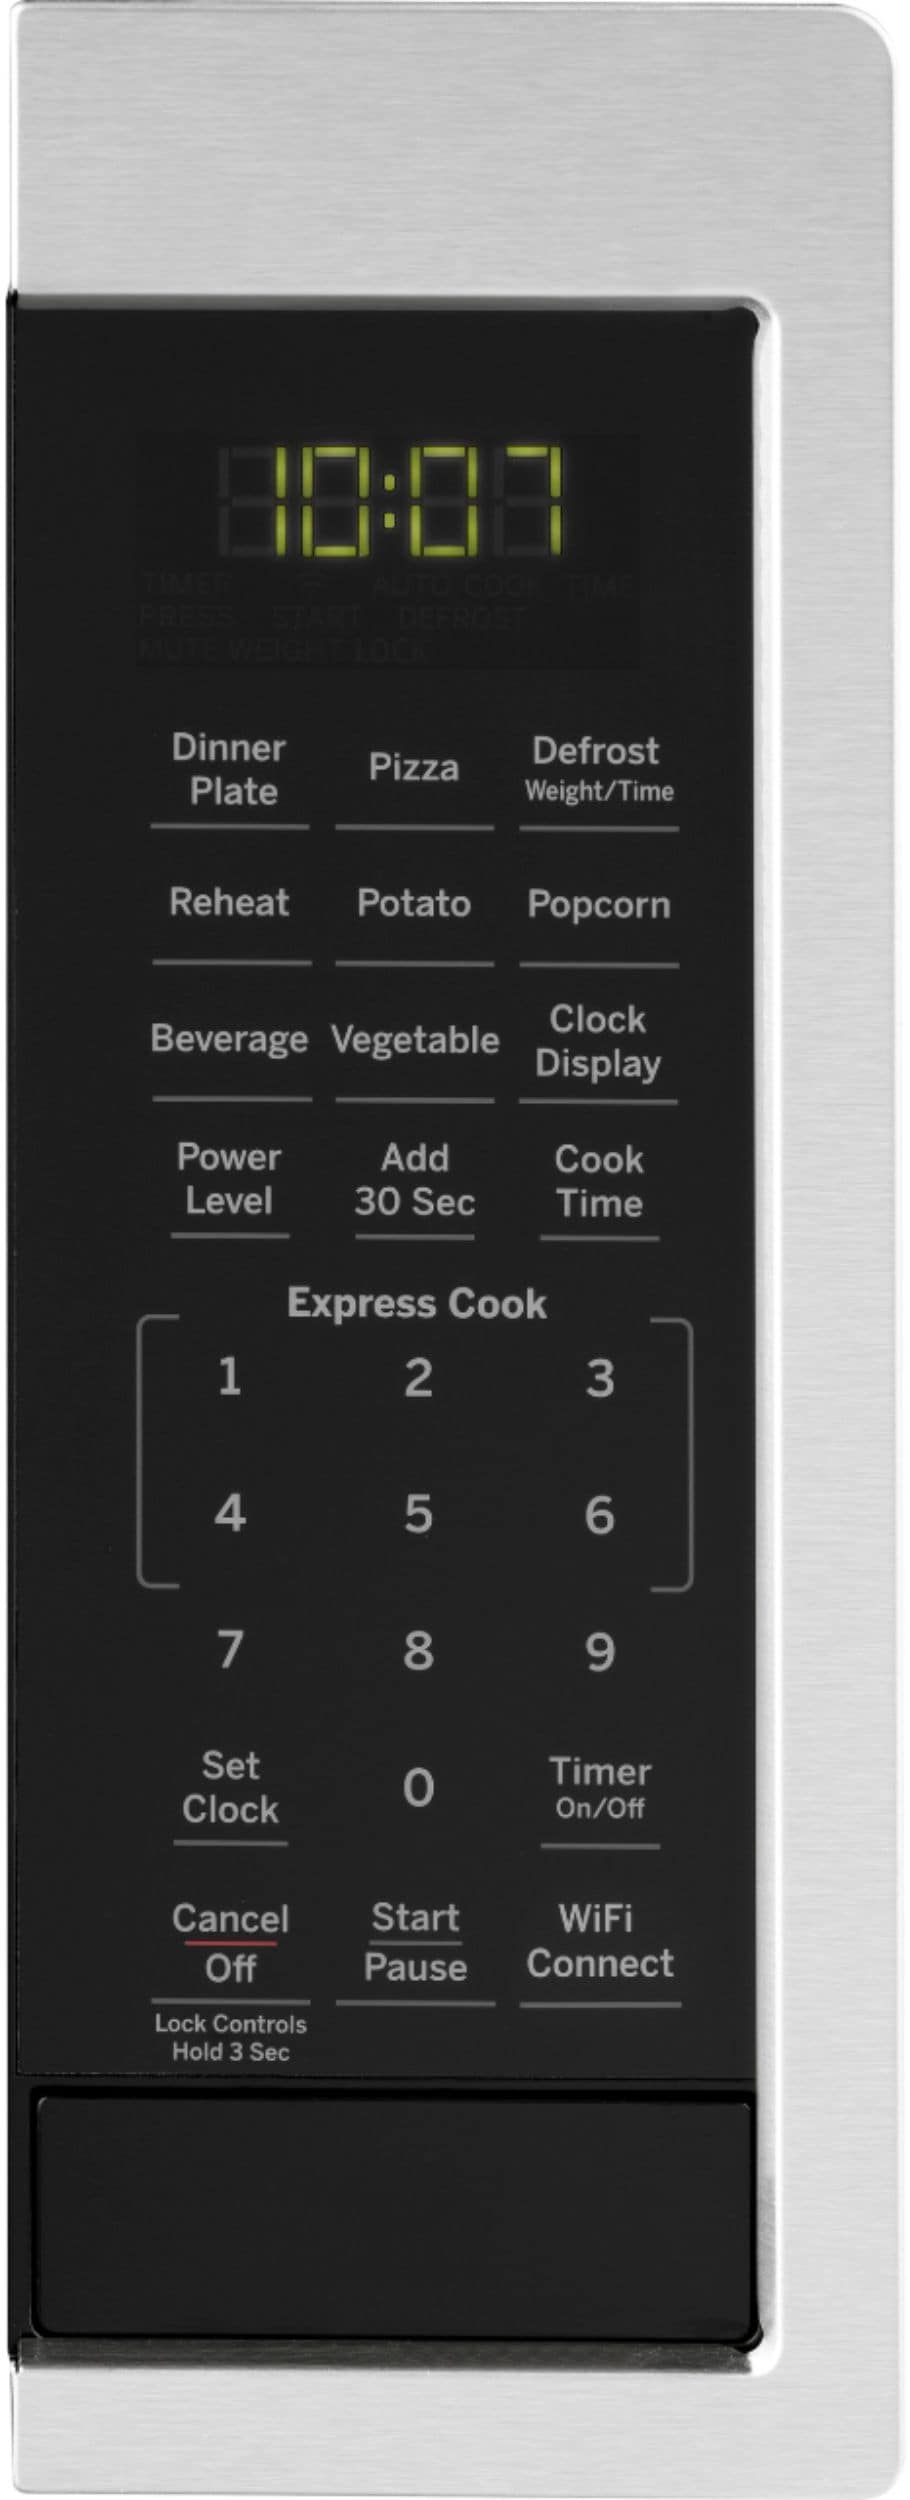 GE - 0.9 Cu. Ft. Capacity Smart Countertop Microwave Oven with Scan-to-Cook Technology - Stainless steel_1